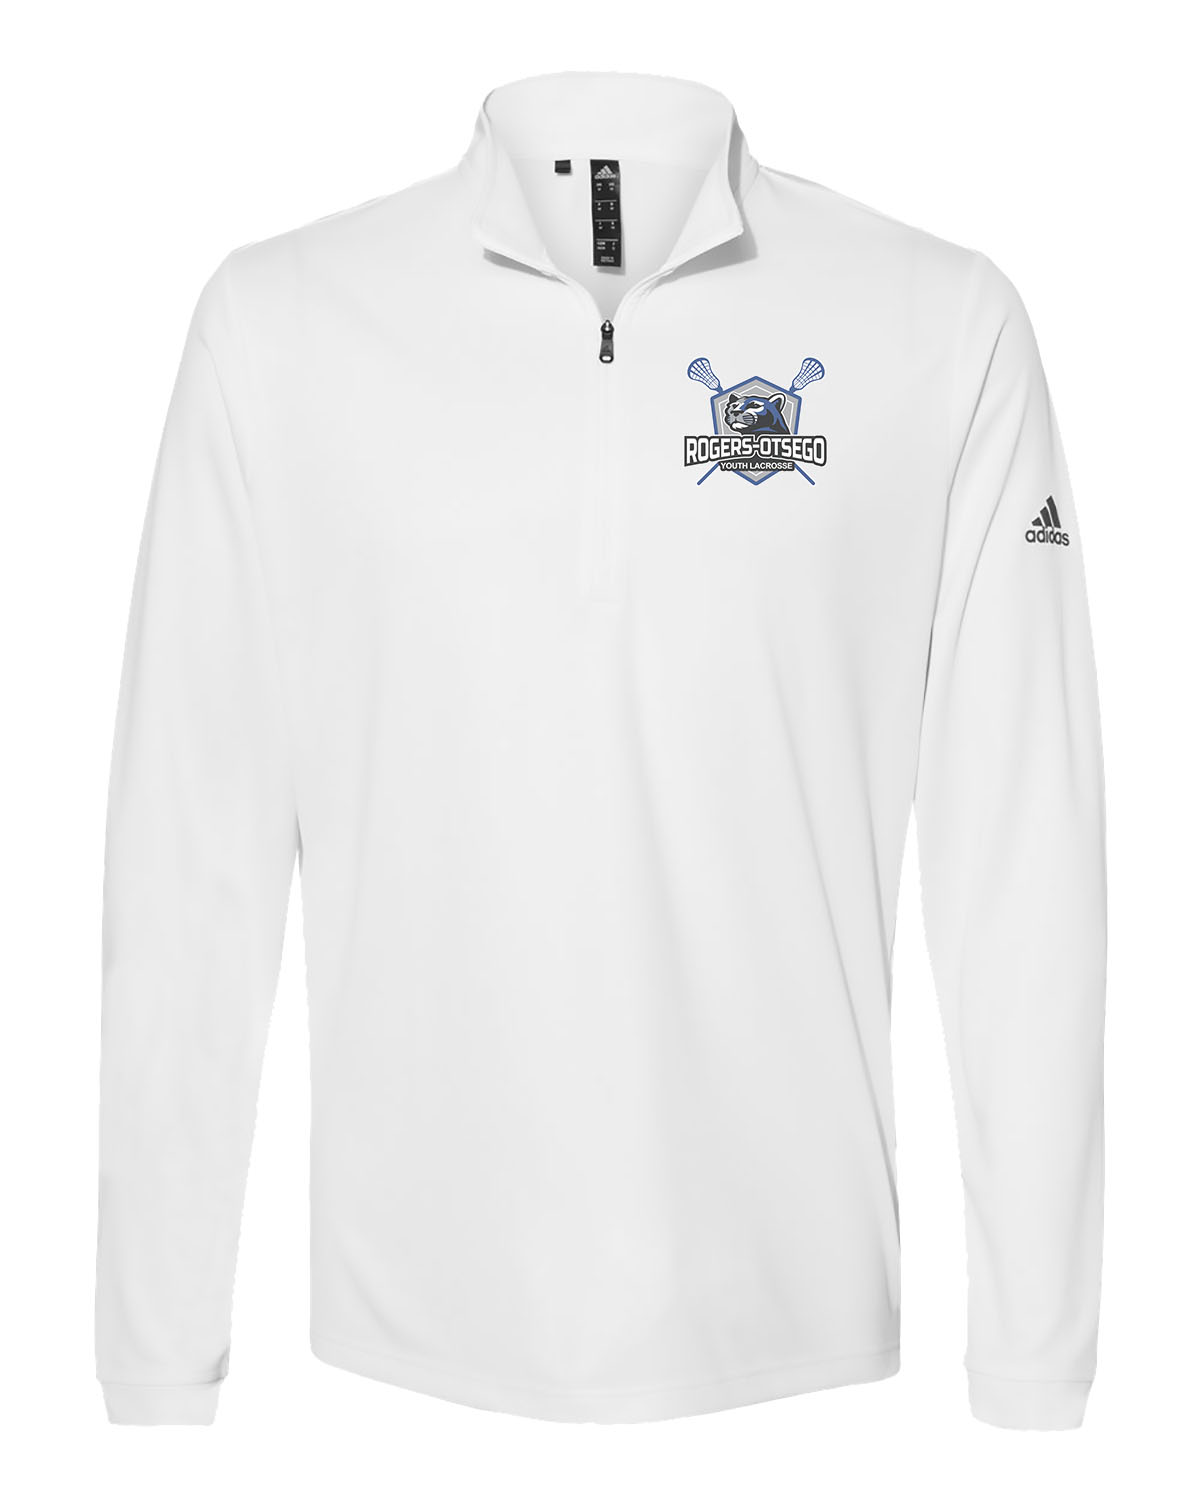 Rogers-Otsego Lacrosse // Men's Pullover - Adidas